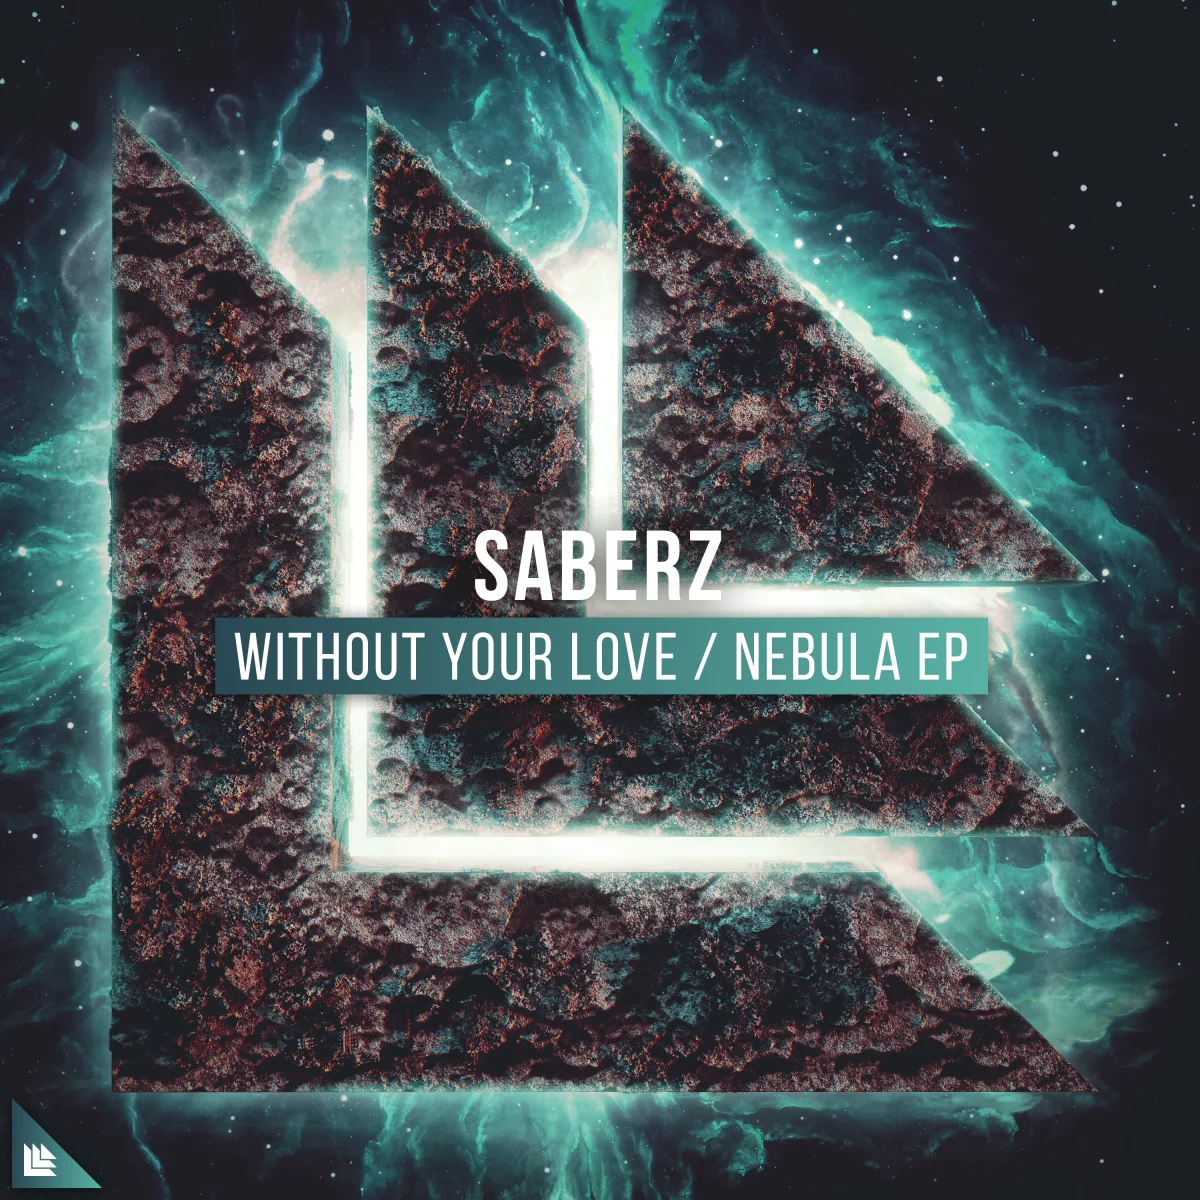 Without Your Love / Nebula EP - SaberZ